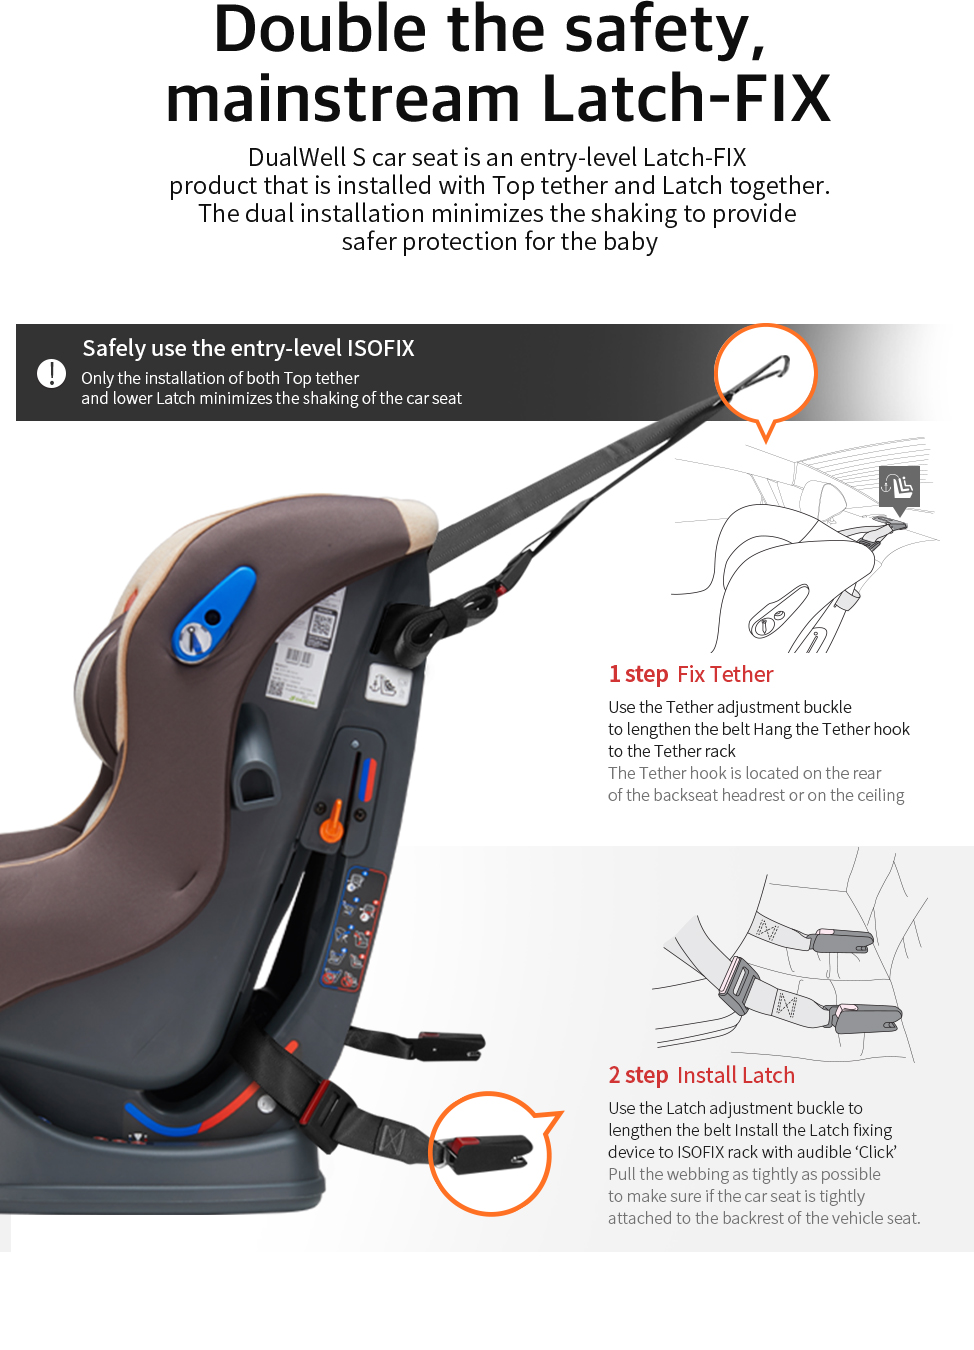 DAIICHI Dualwell S carseat car seat is an entry-level Latch-FIX product that is installed with Top tether and Latch together. The dual installation minimizes the shaking to provide safer protection for the baby.